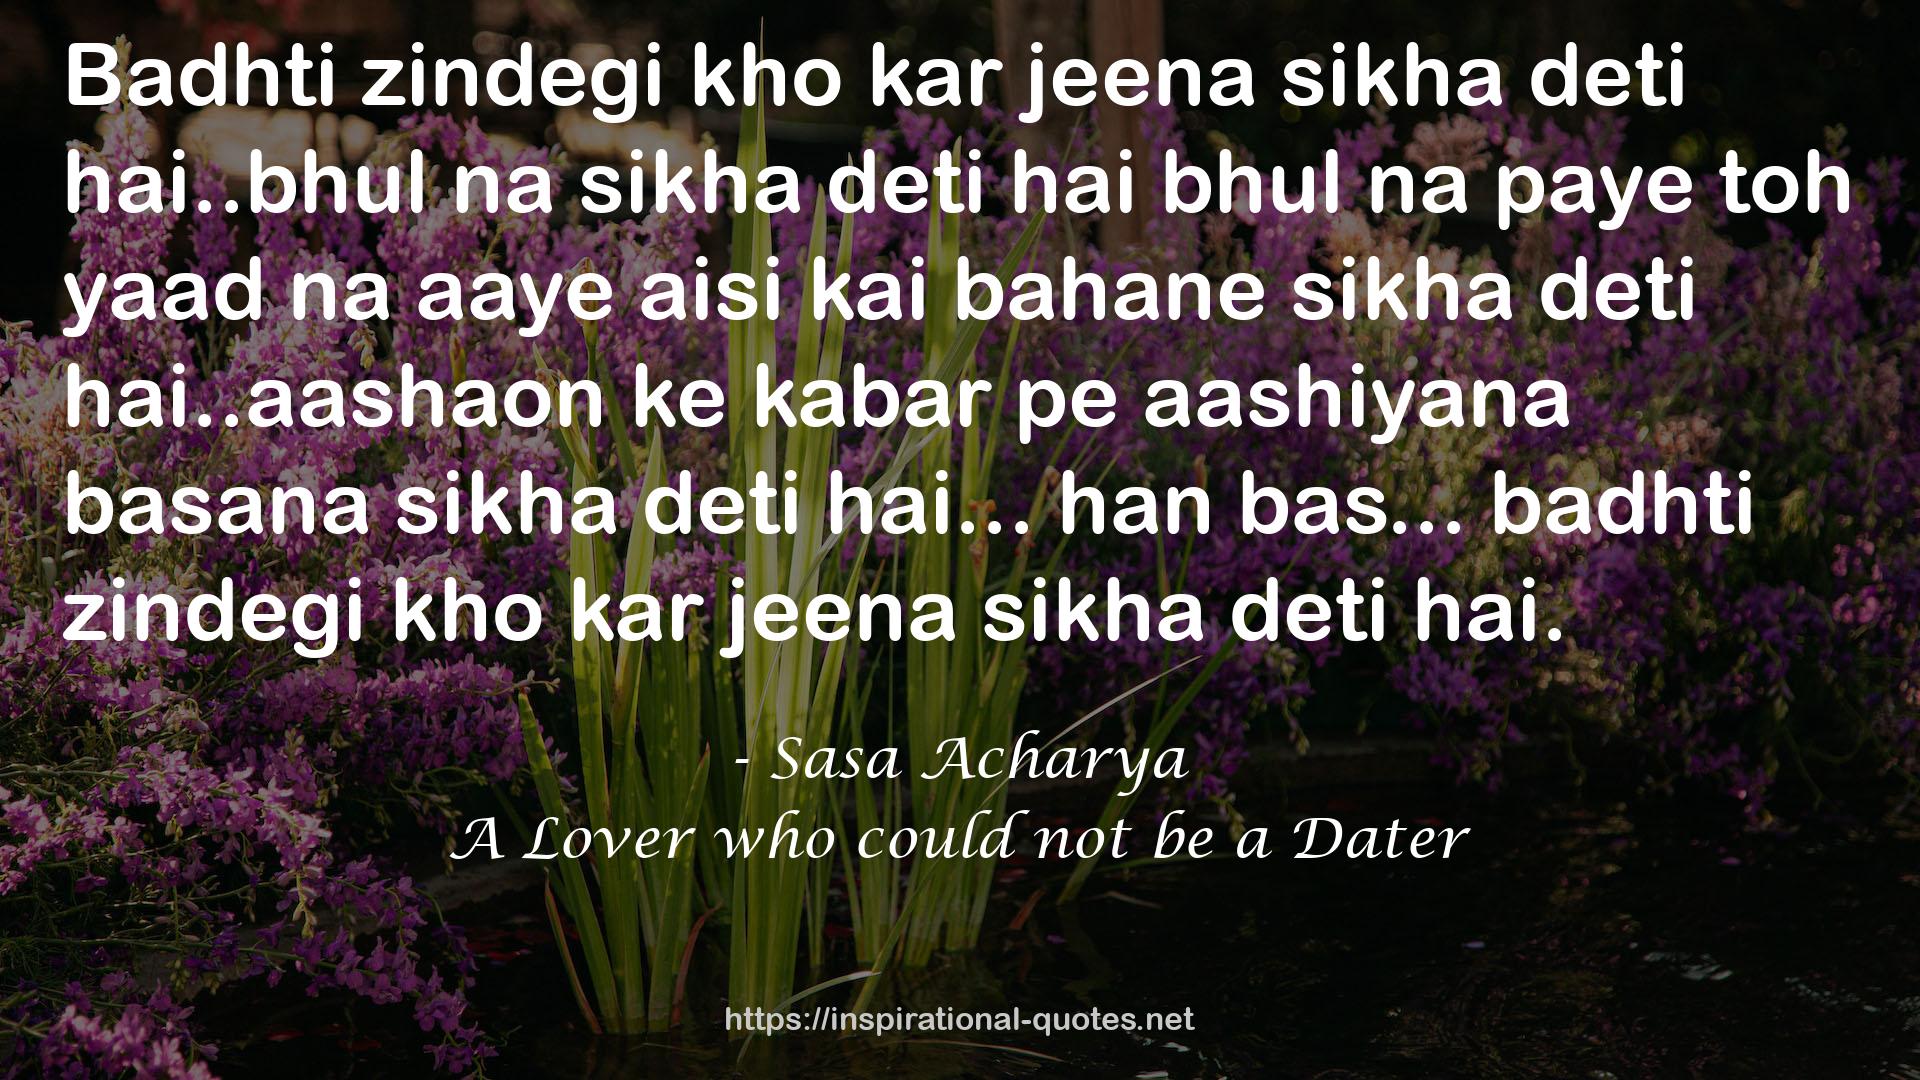 A Lover who could not be a Dater QUOTES